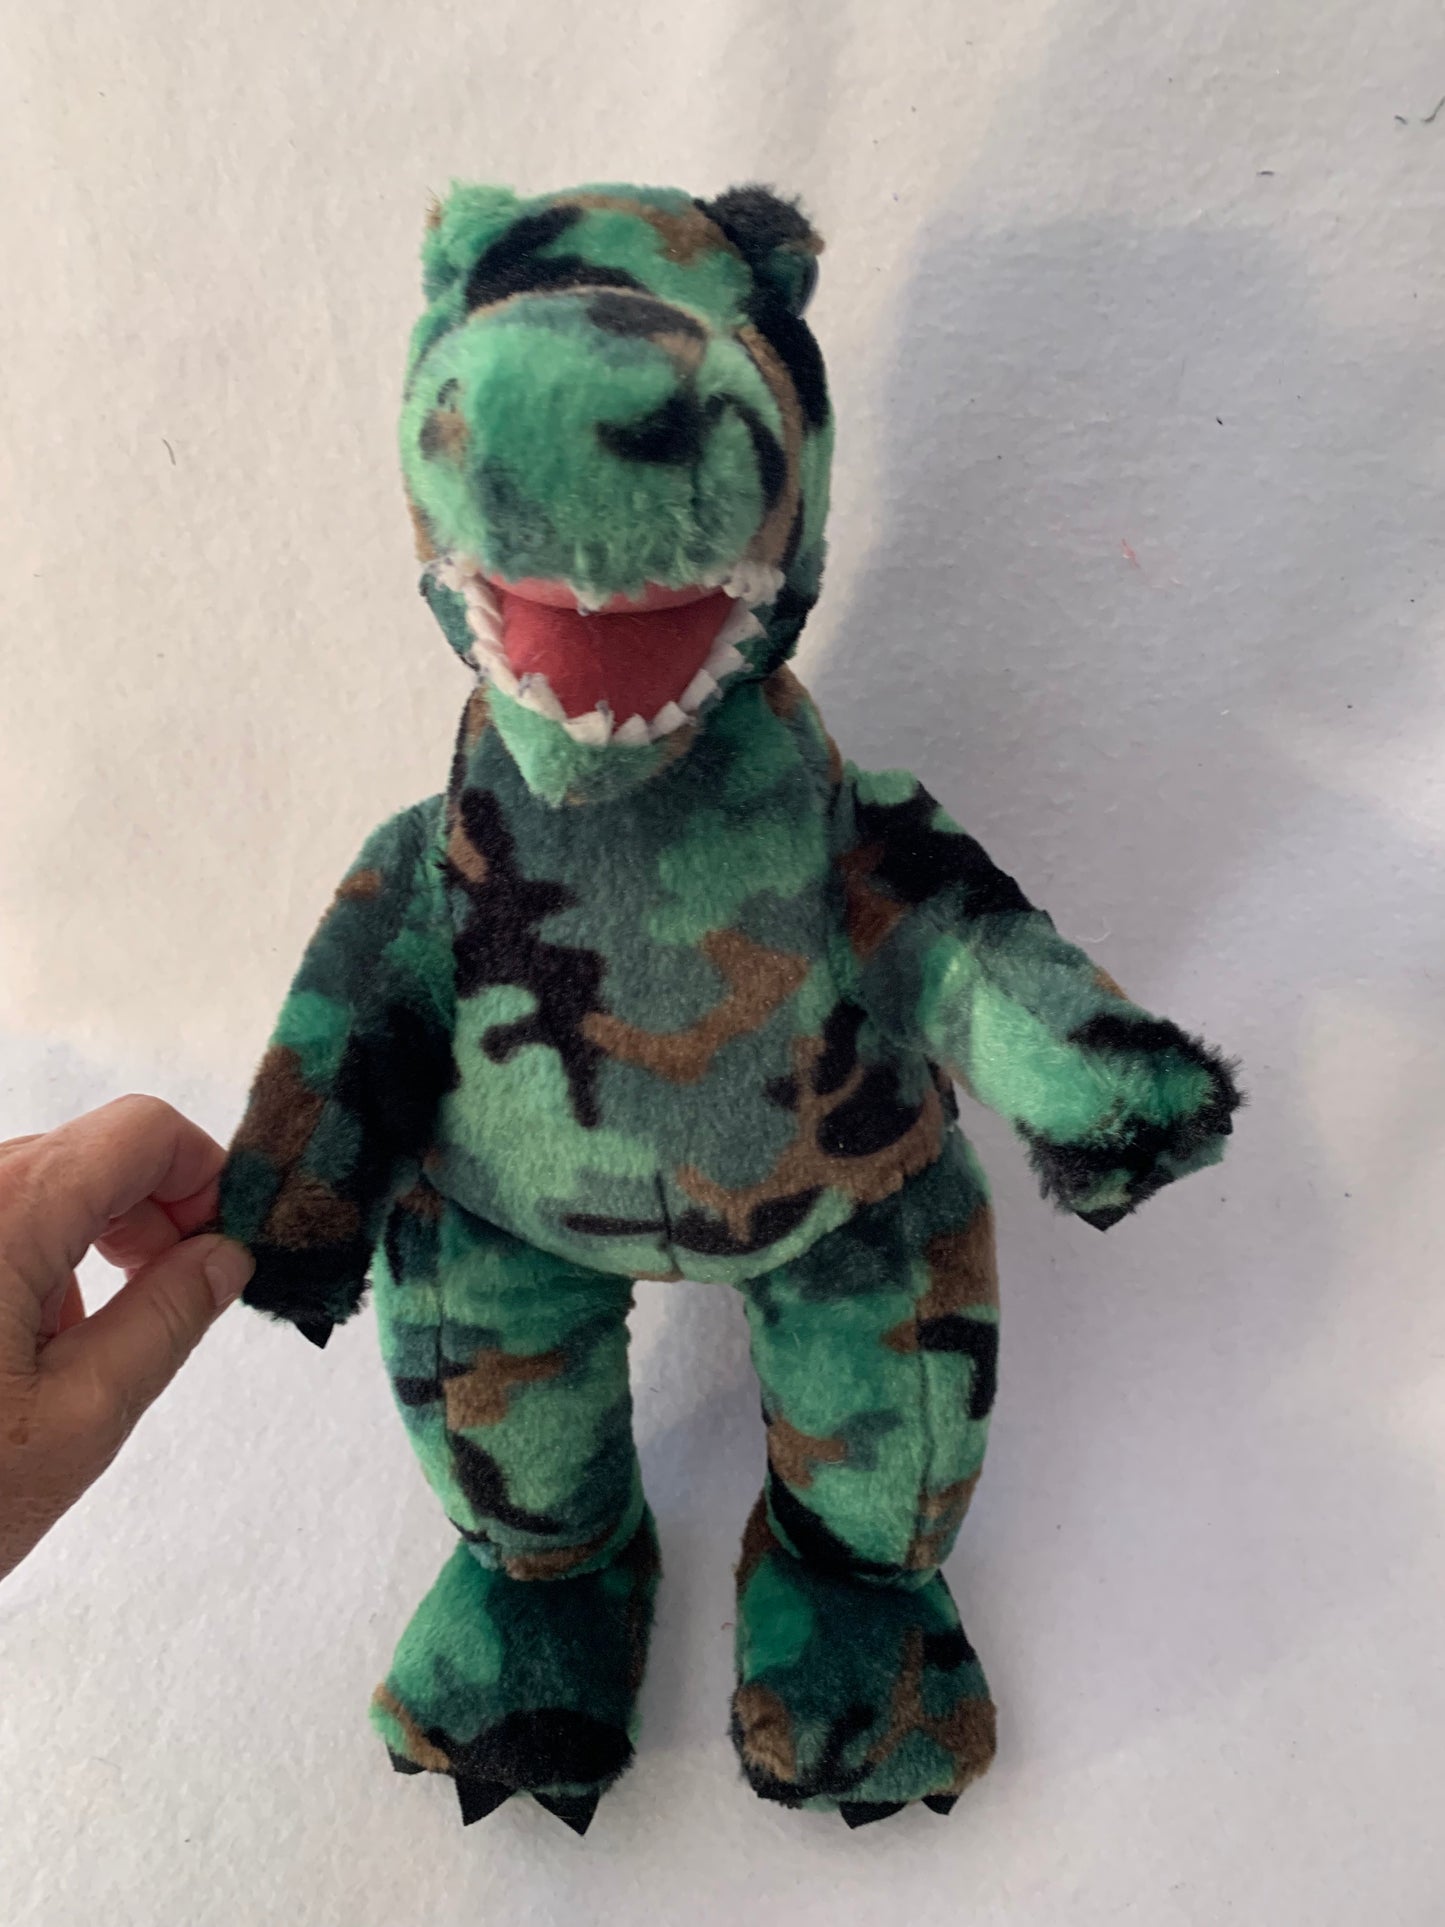 Weighted stuffed animal - Tyrannosaurus Rex with 2-4 lbs, washable weighted buddy, triceratops, dinosaur, dino